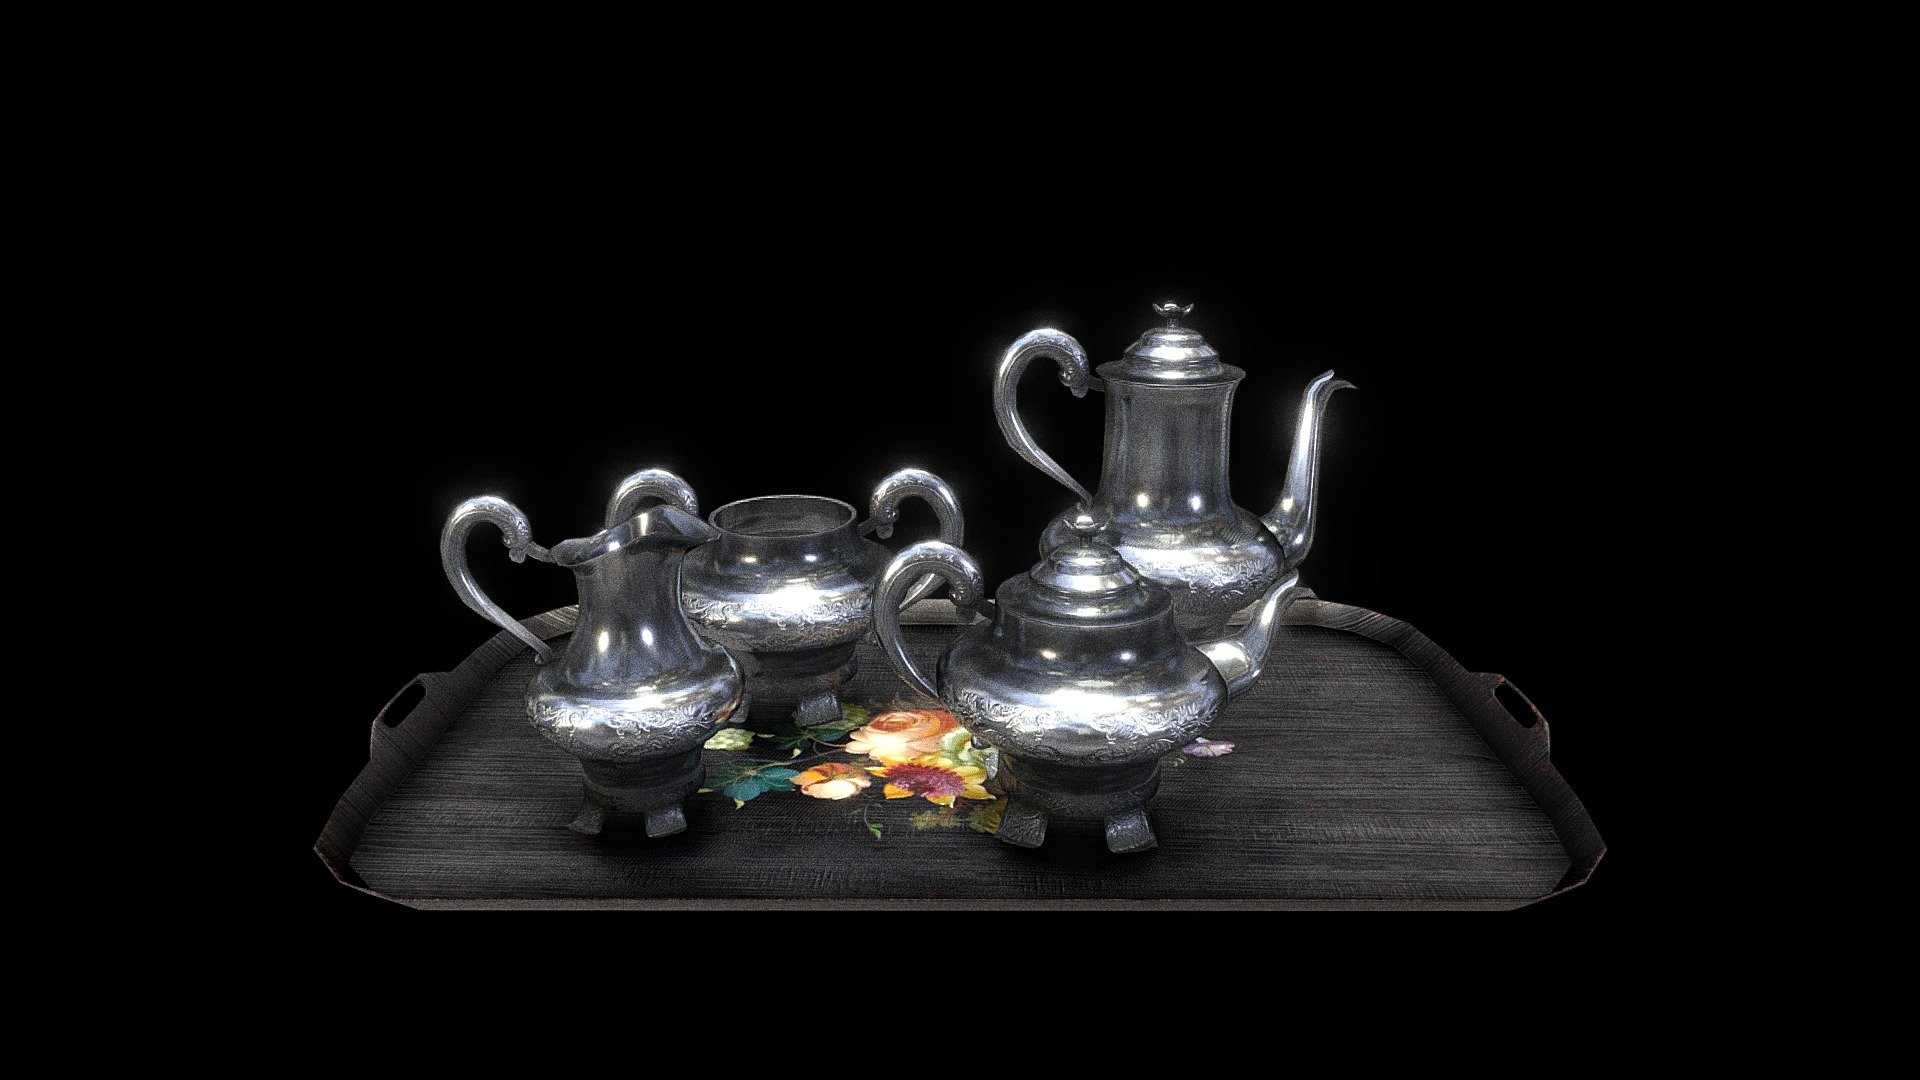 A Victorian four-piece tea set (London, England, 1851-1852) of fine silver with floral and begetal decorations together with a wooden tray decorated with flower painting. Created with low polygonage for any use 3d model